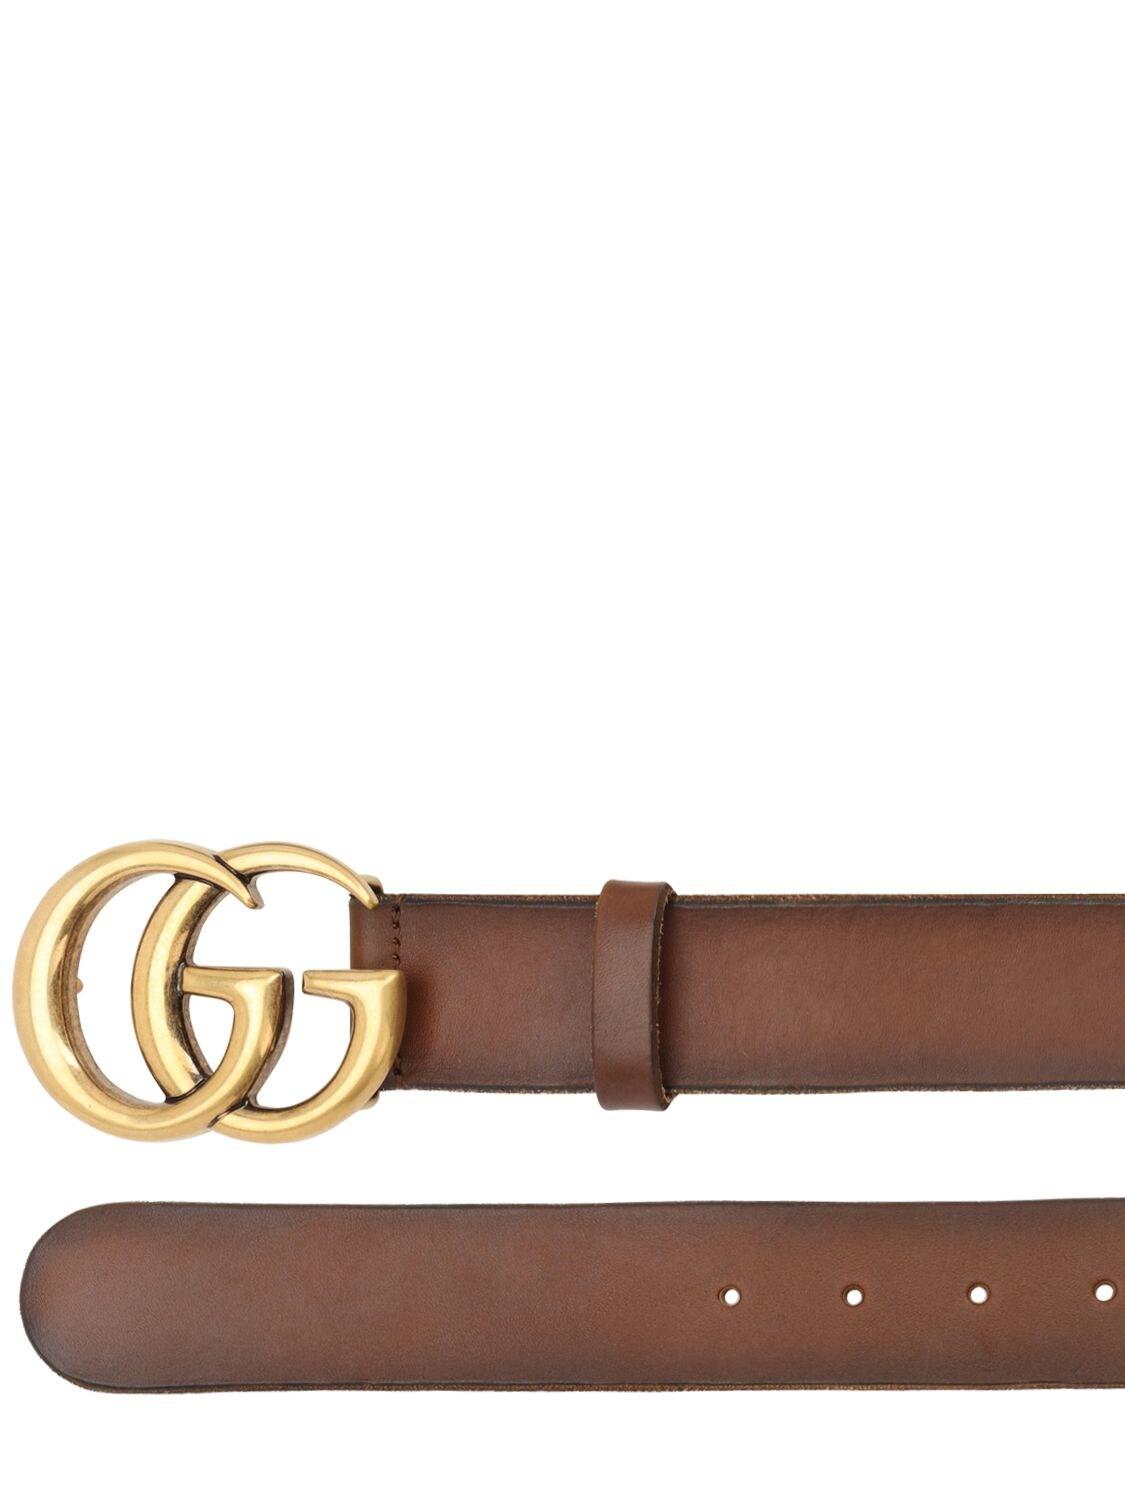 Gucci 40mm Gg Leather Belt in Brown - Lyst